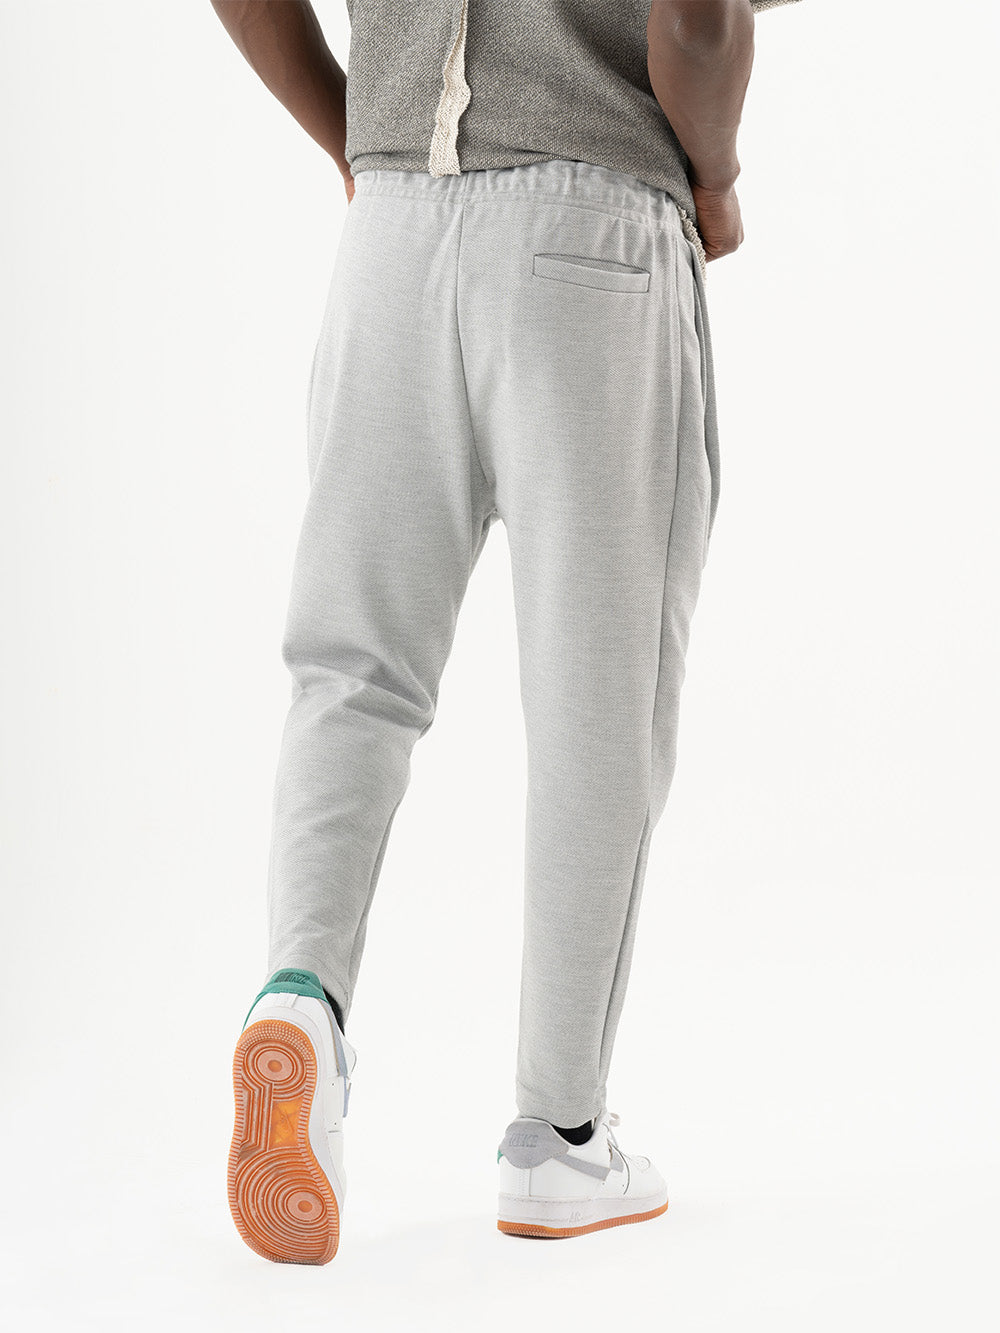 A man wearing SERENE JOGGERS and a pair of sneakers, perfect for everyday wear.